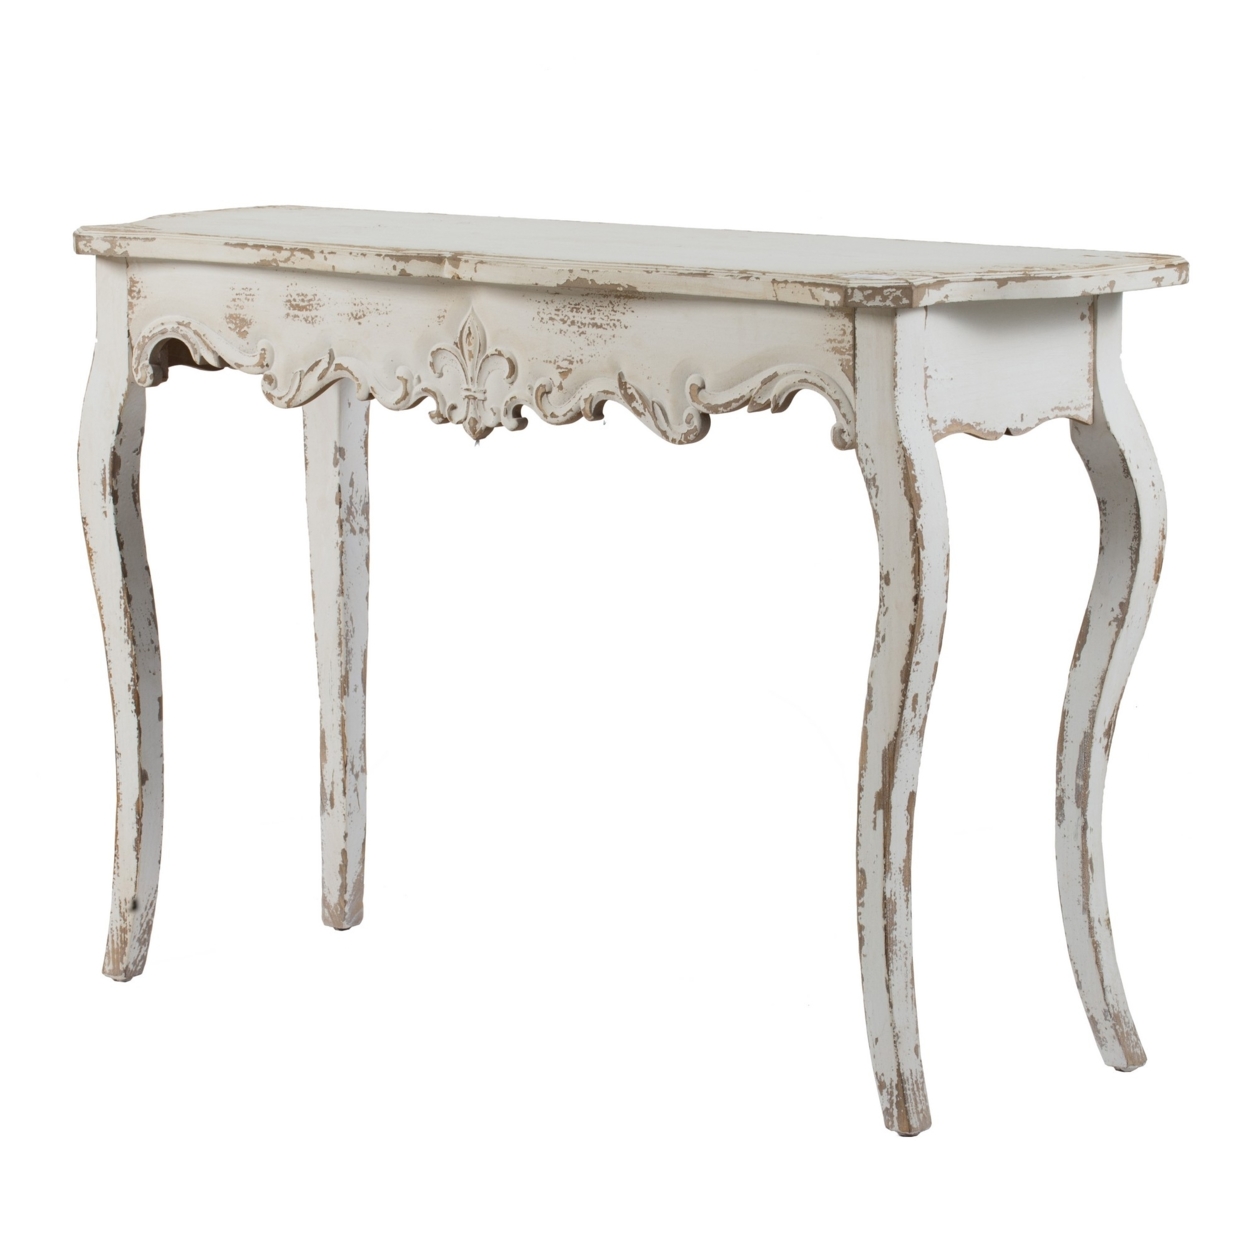 30 Inch Console Table, Fir Wood, Rectangle, Curved Legs, Distressed White, Saltoro Sherpi